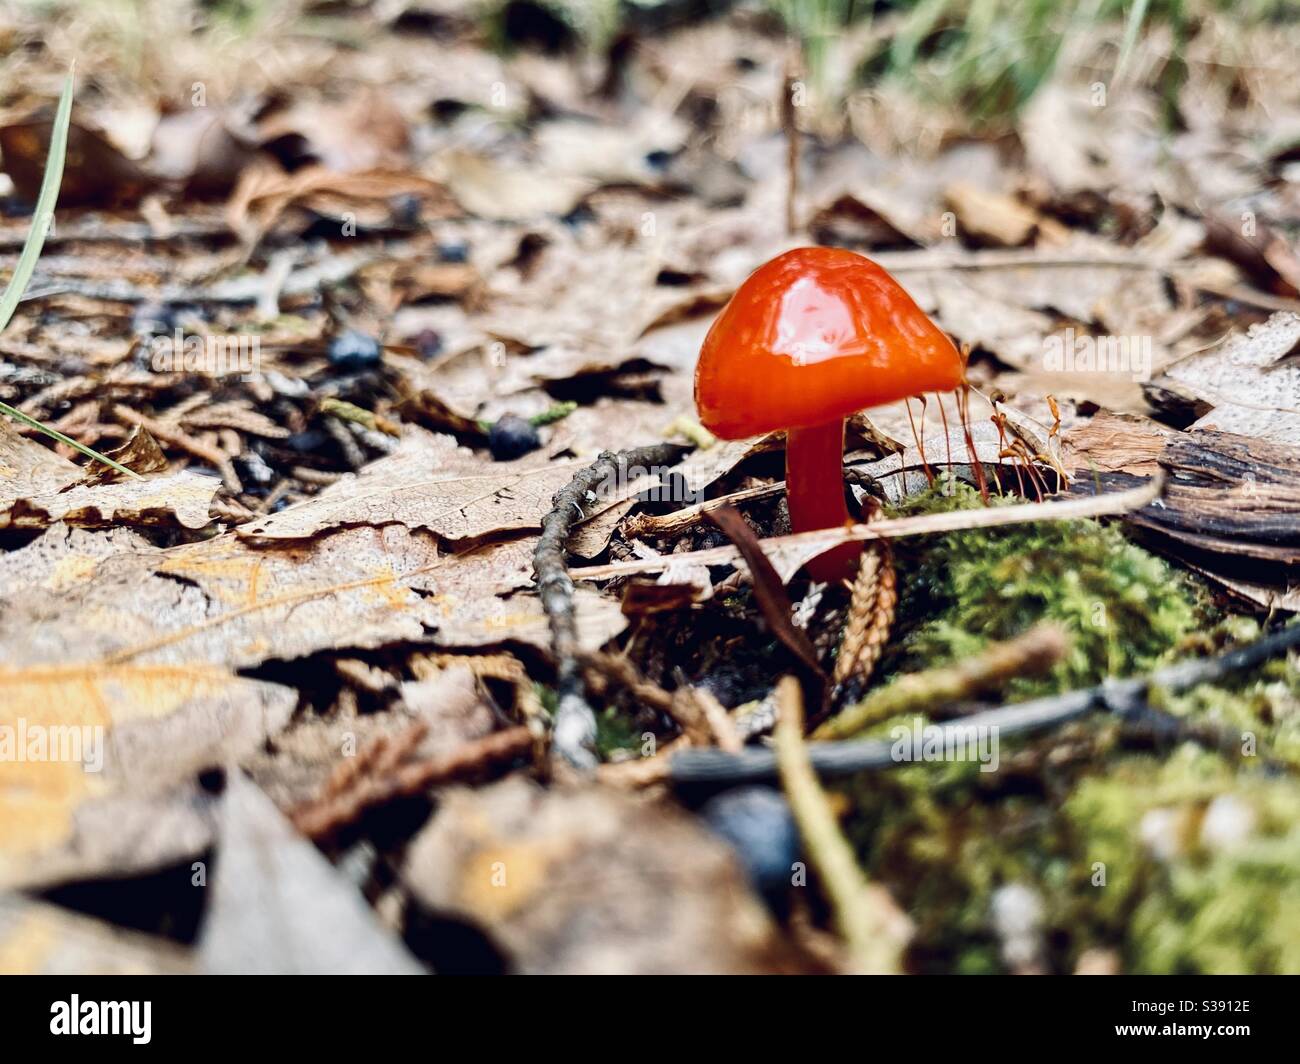 Small mushroom on the forest floor surrounded by leaves and lichen. Stock Photo